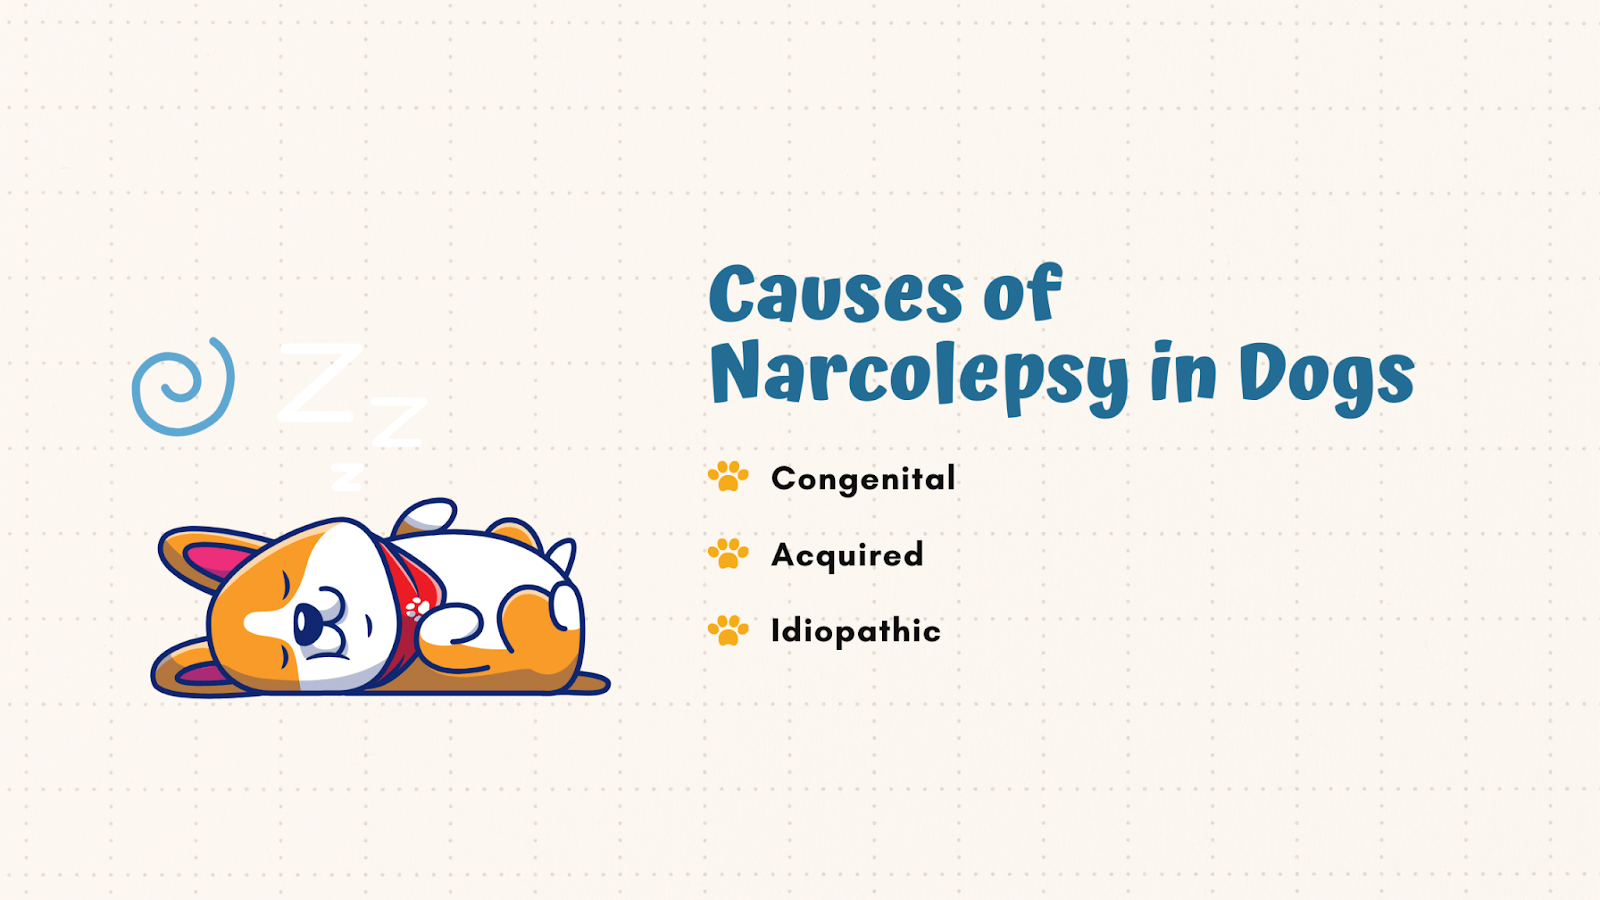 Causes of narcolepsy in dogs